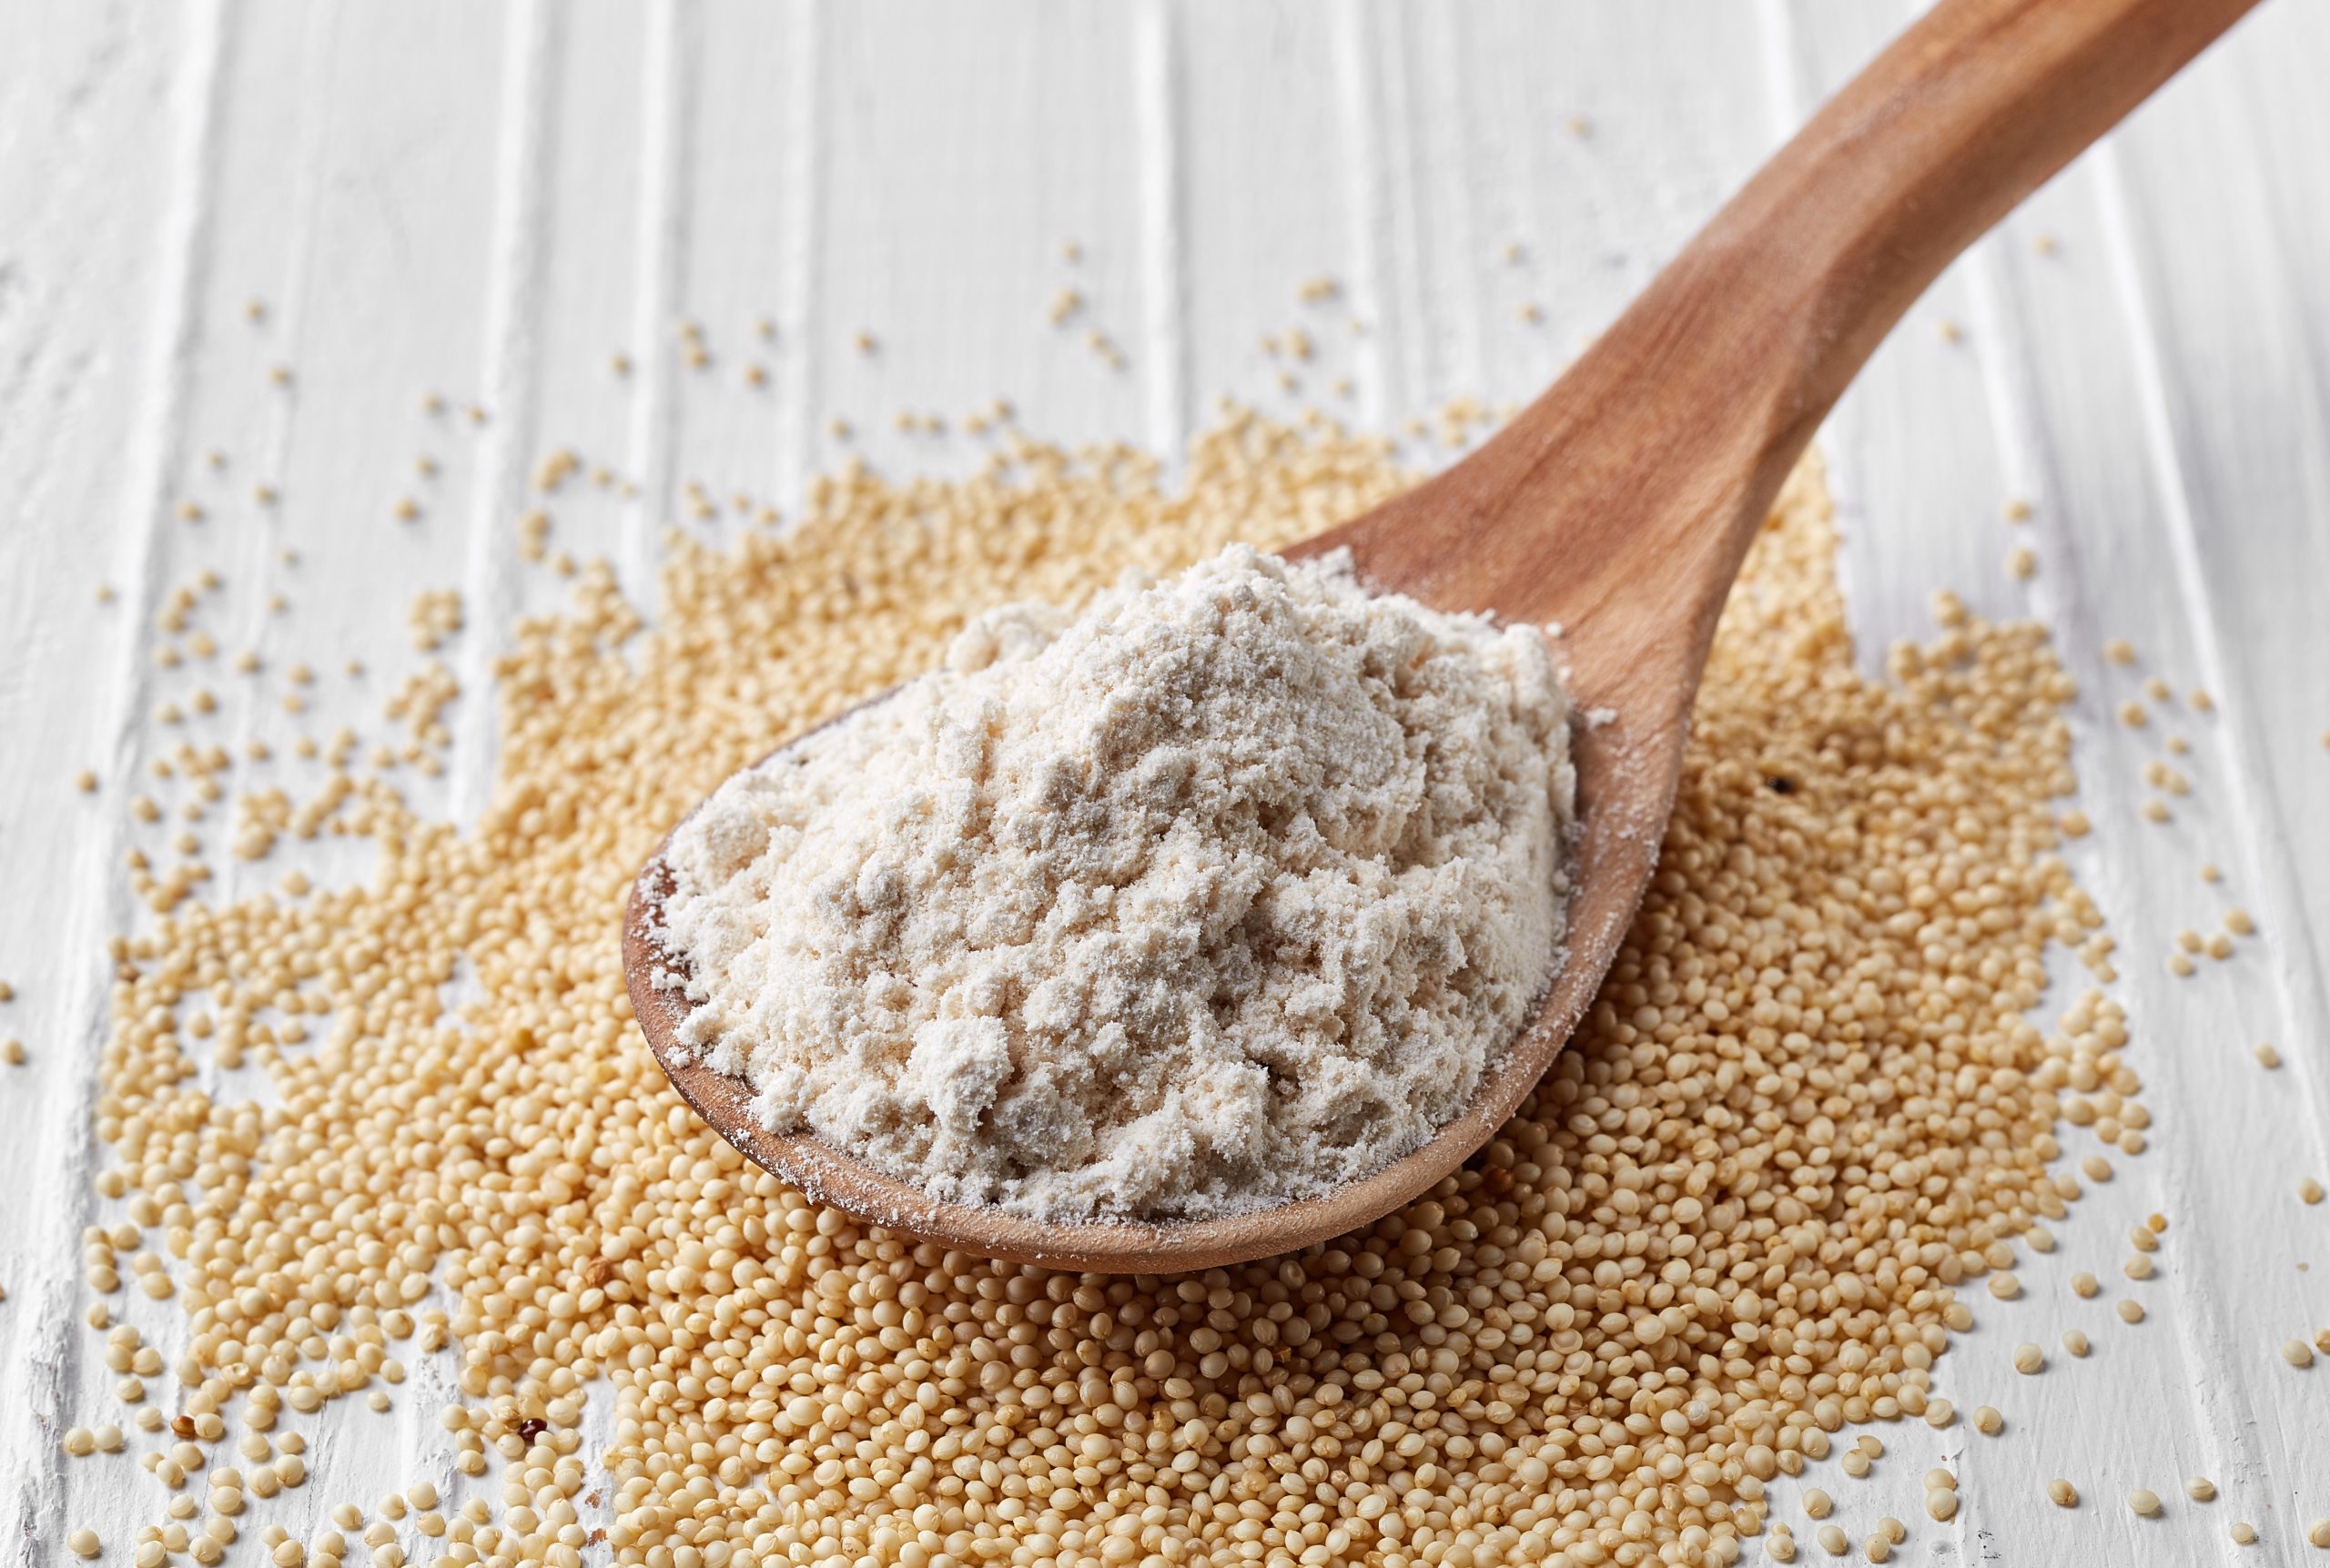 Spoon,Of,Amaranth,Seeds,Flour,On,White,Wooden,Background